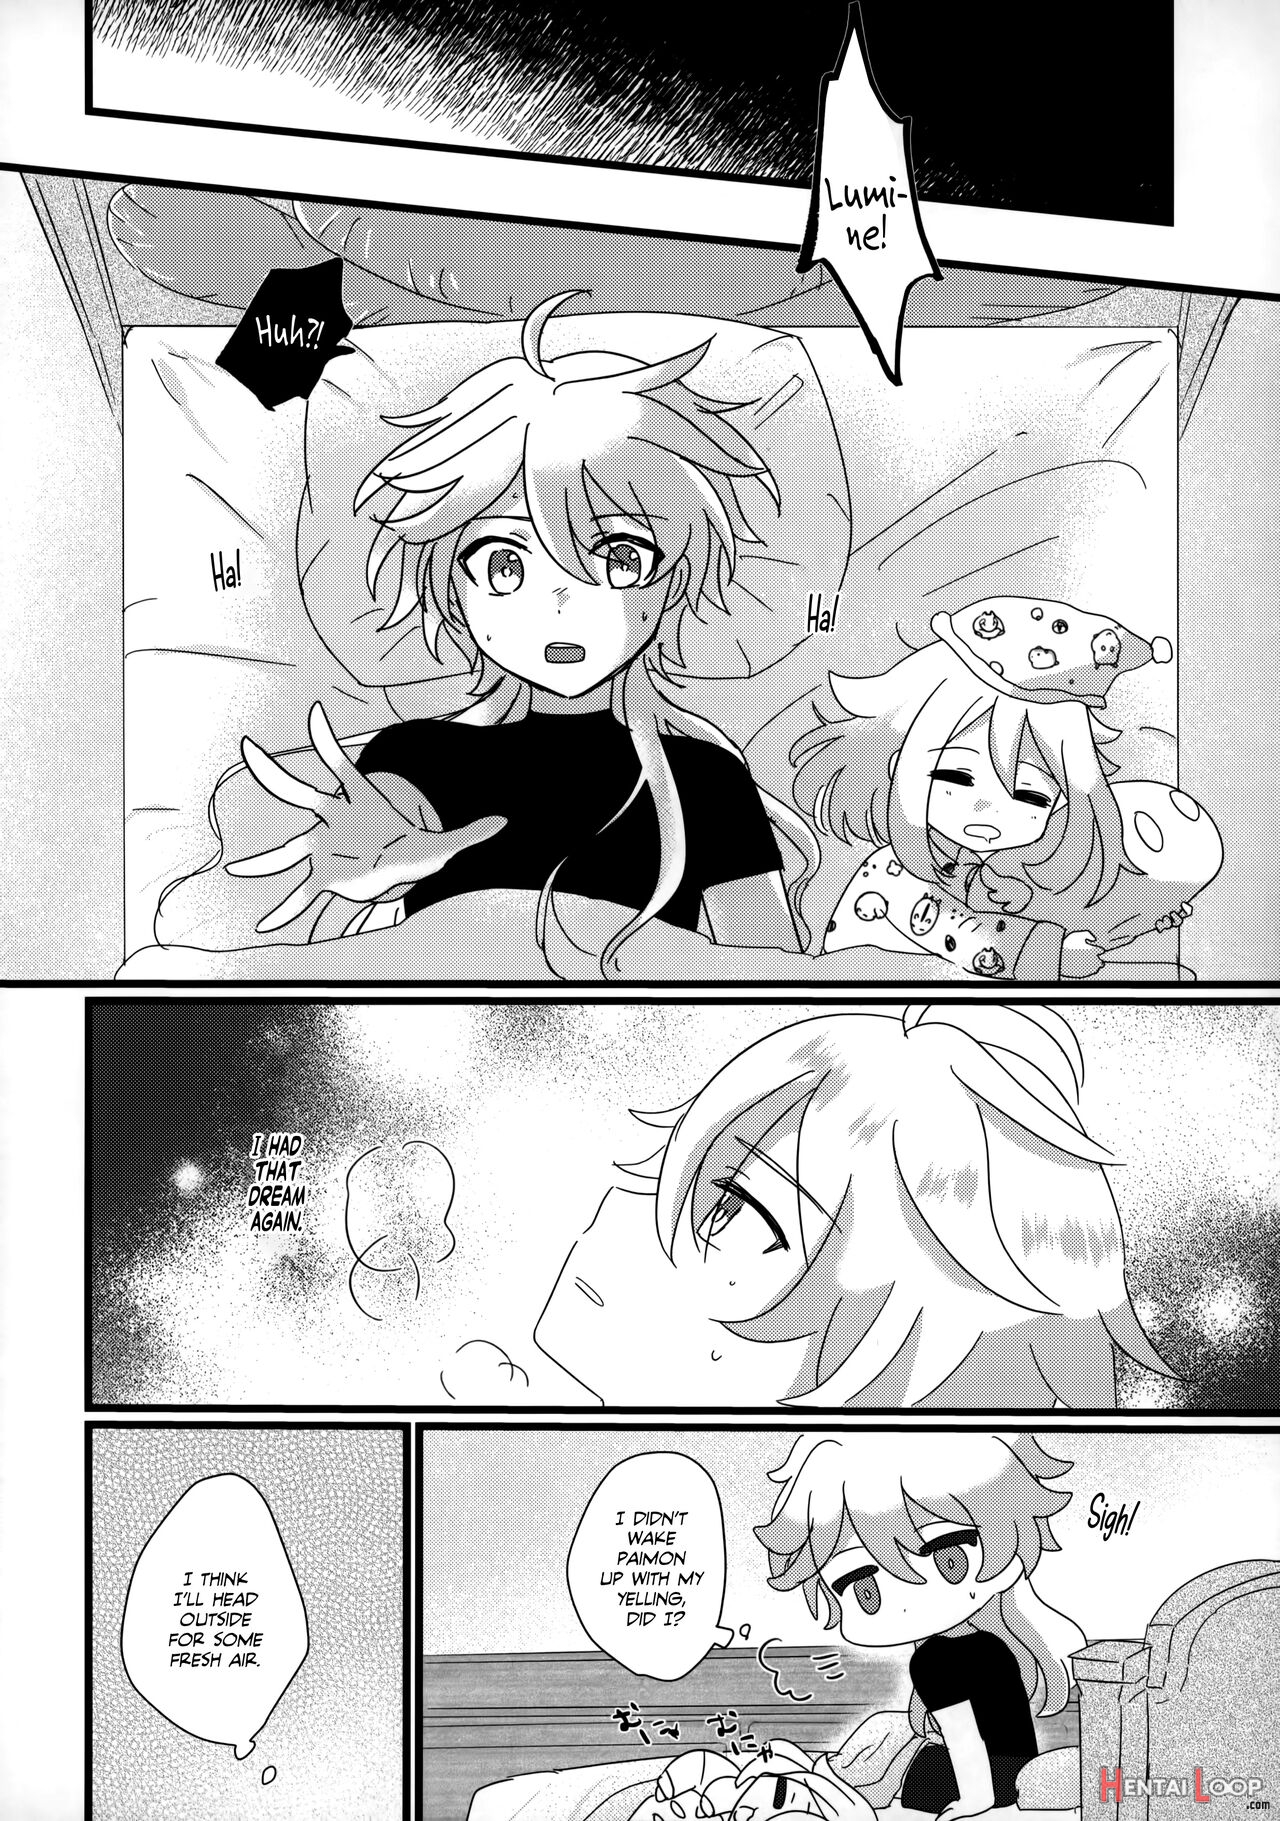 We Meet Again, Onii-chan! page 5